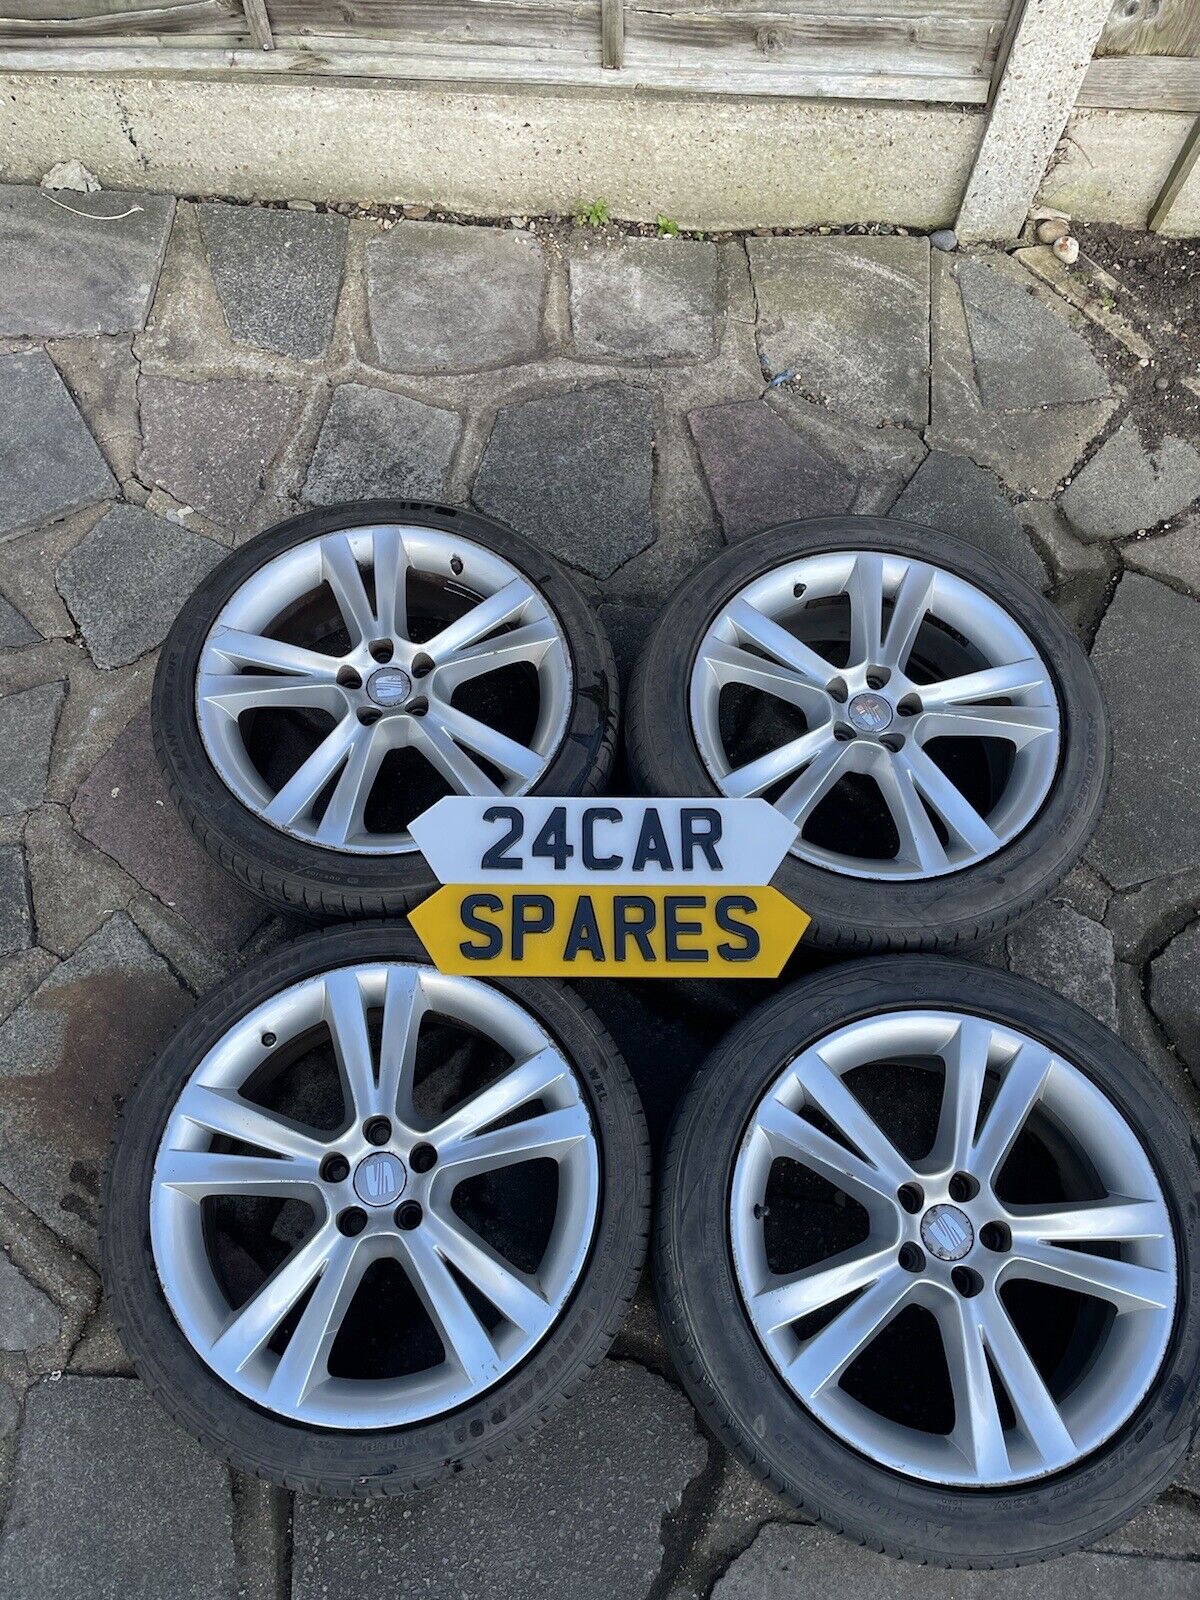 SEAT IBIZA 17 Inch Alloys And Tyres